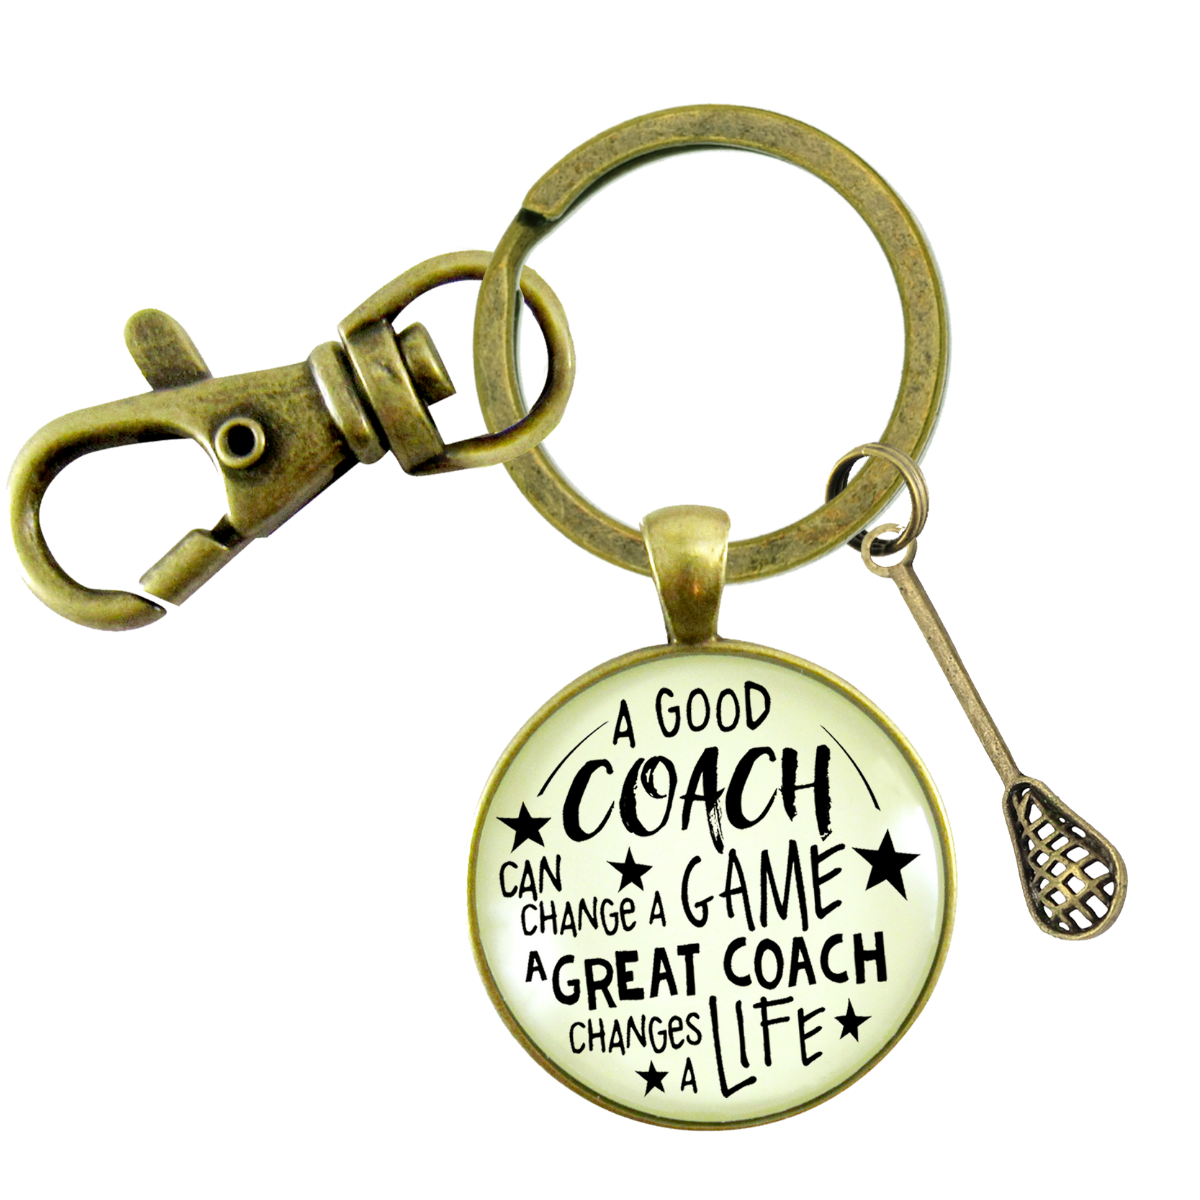 Lacrosse Coaching Sport Keychain Great Coach Changes Life Thank You Gift - Gutsy Goodness Handmade Jewelry;Lacrosse Coaching Sport Keychain Great Coach Changes Life Thank You Gift - Gutsy Goodness Handmade Jewelry Gifts